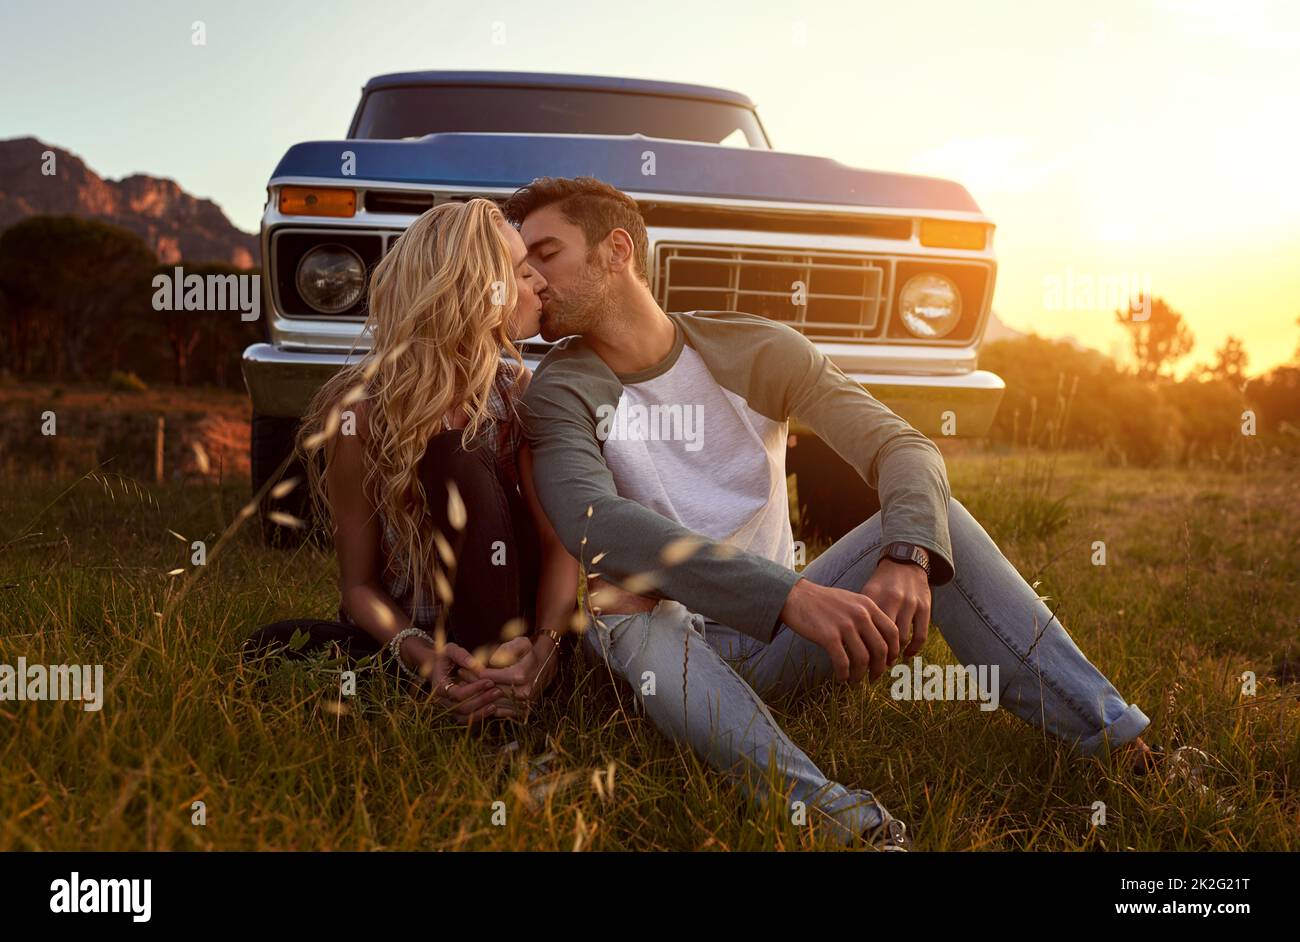 Letting their love blossom. Shot of an affectionate young couple on a roadtrip. Stock Photo